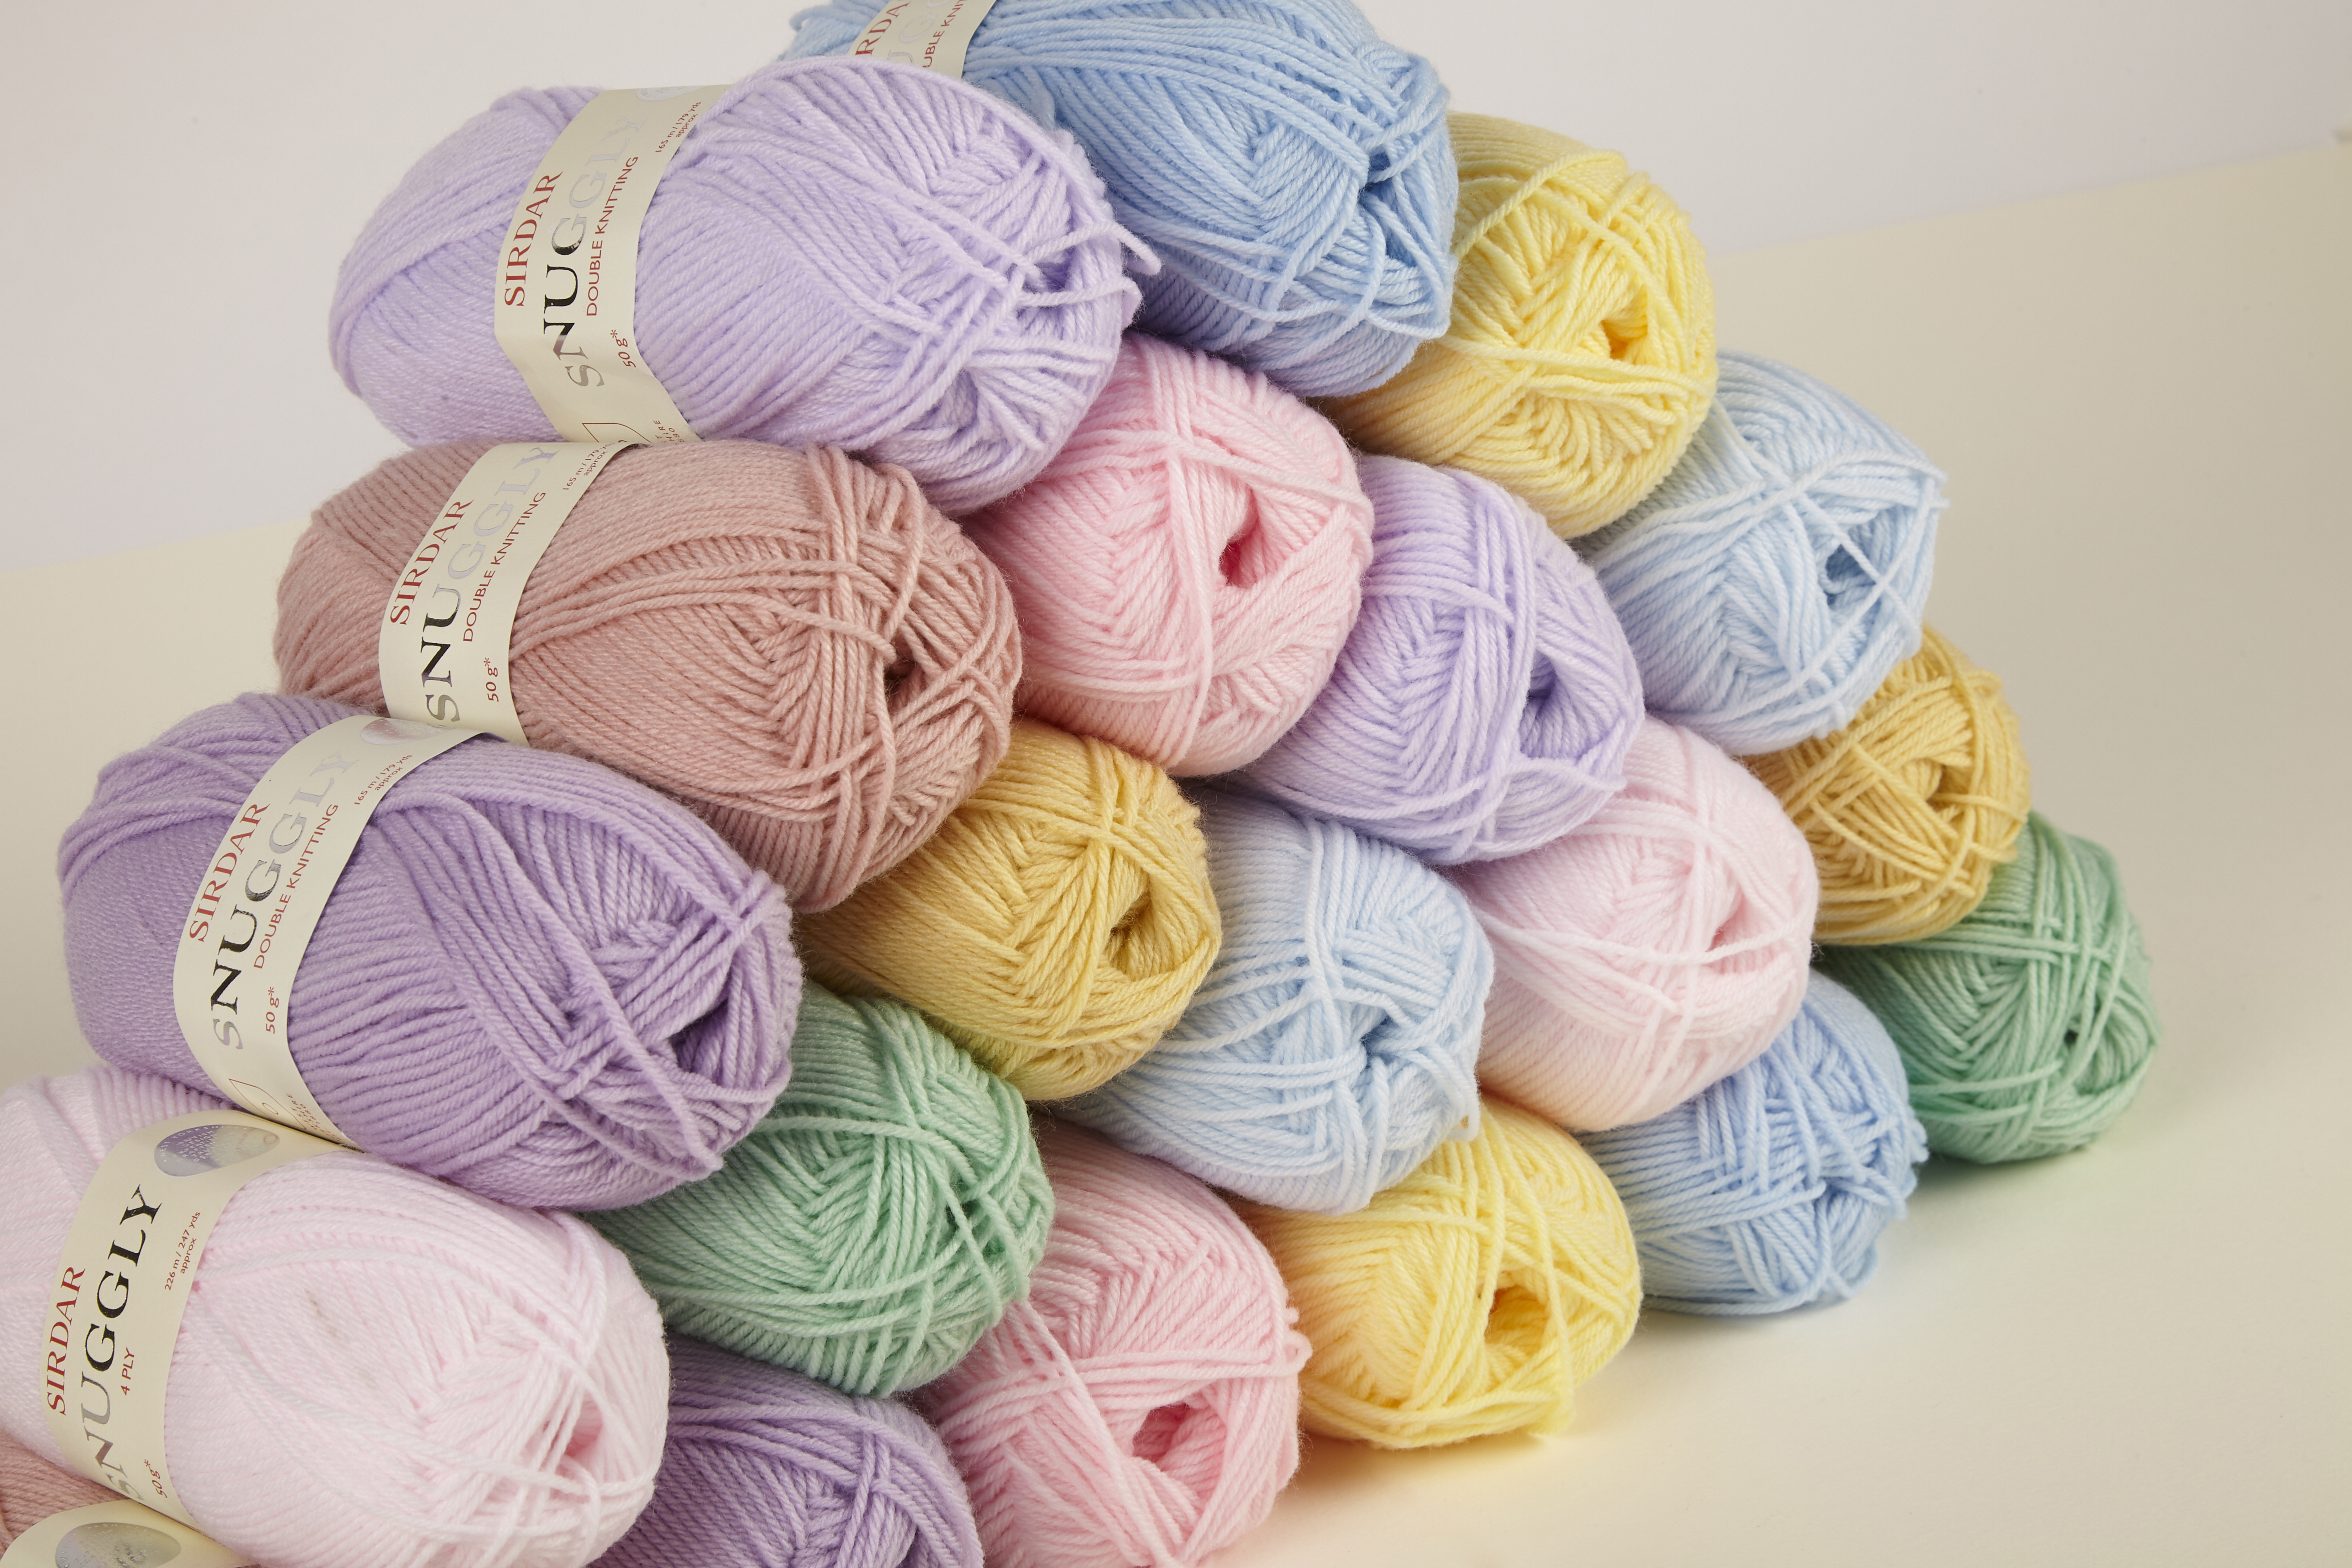 Knitting Wool Sales  We aim to be the cheapest